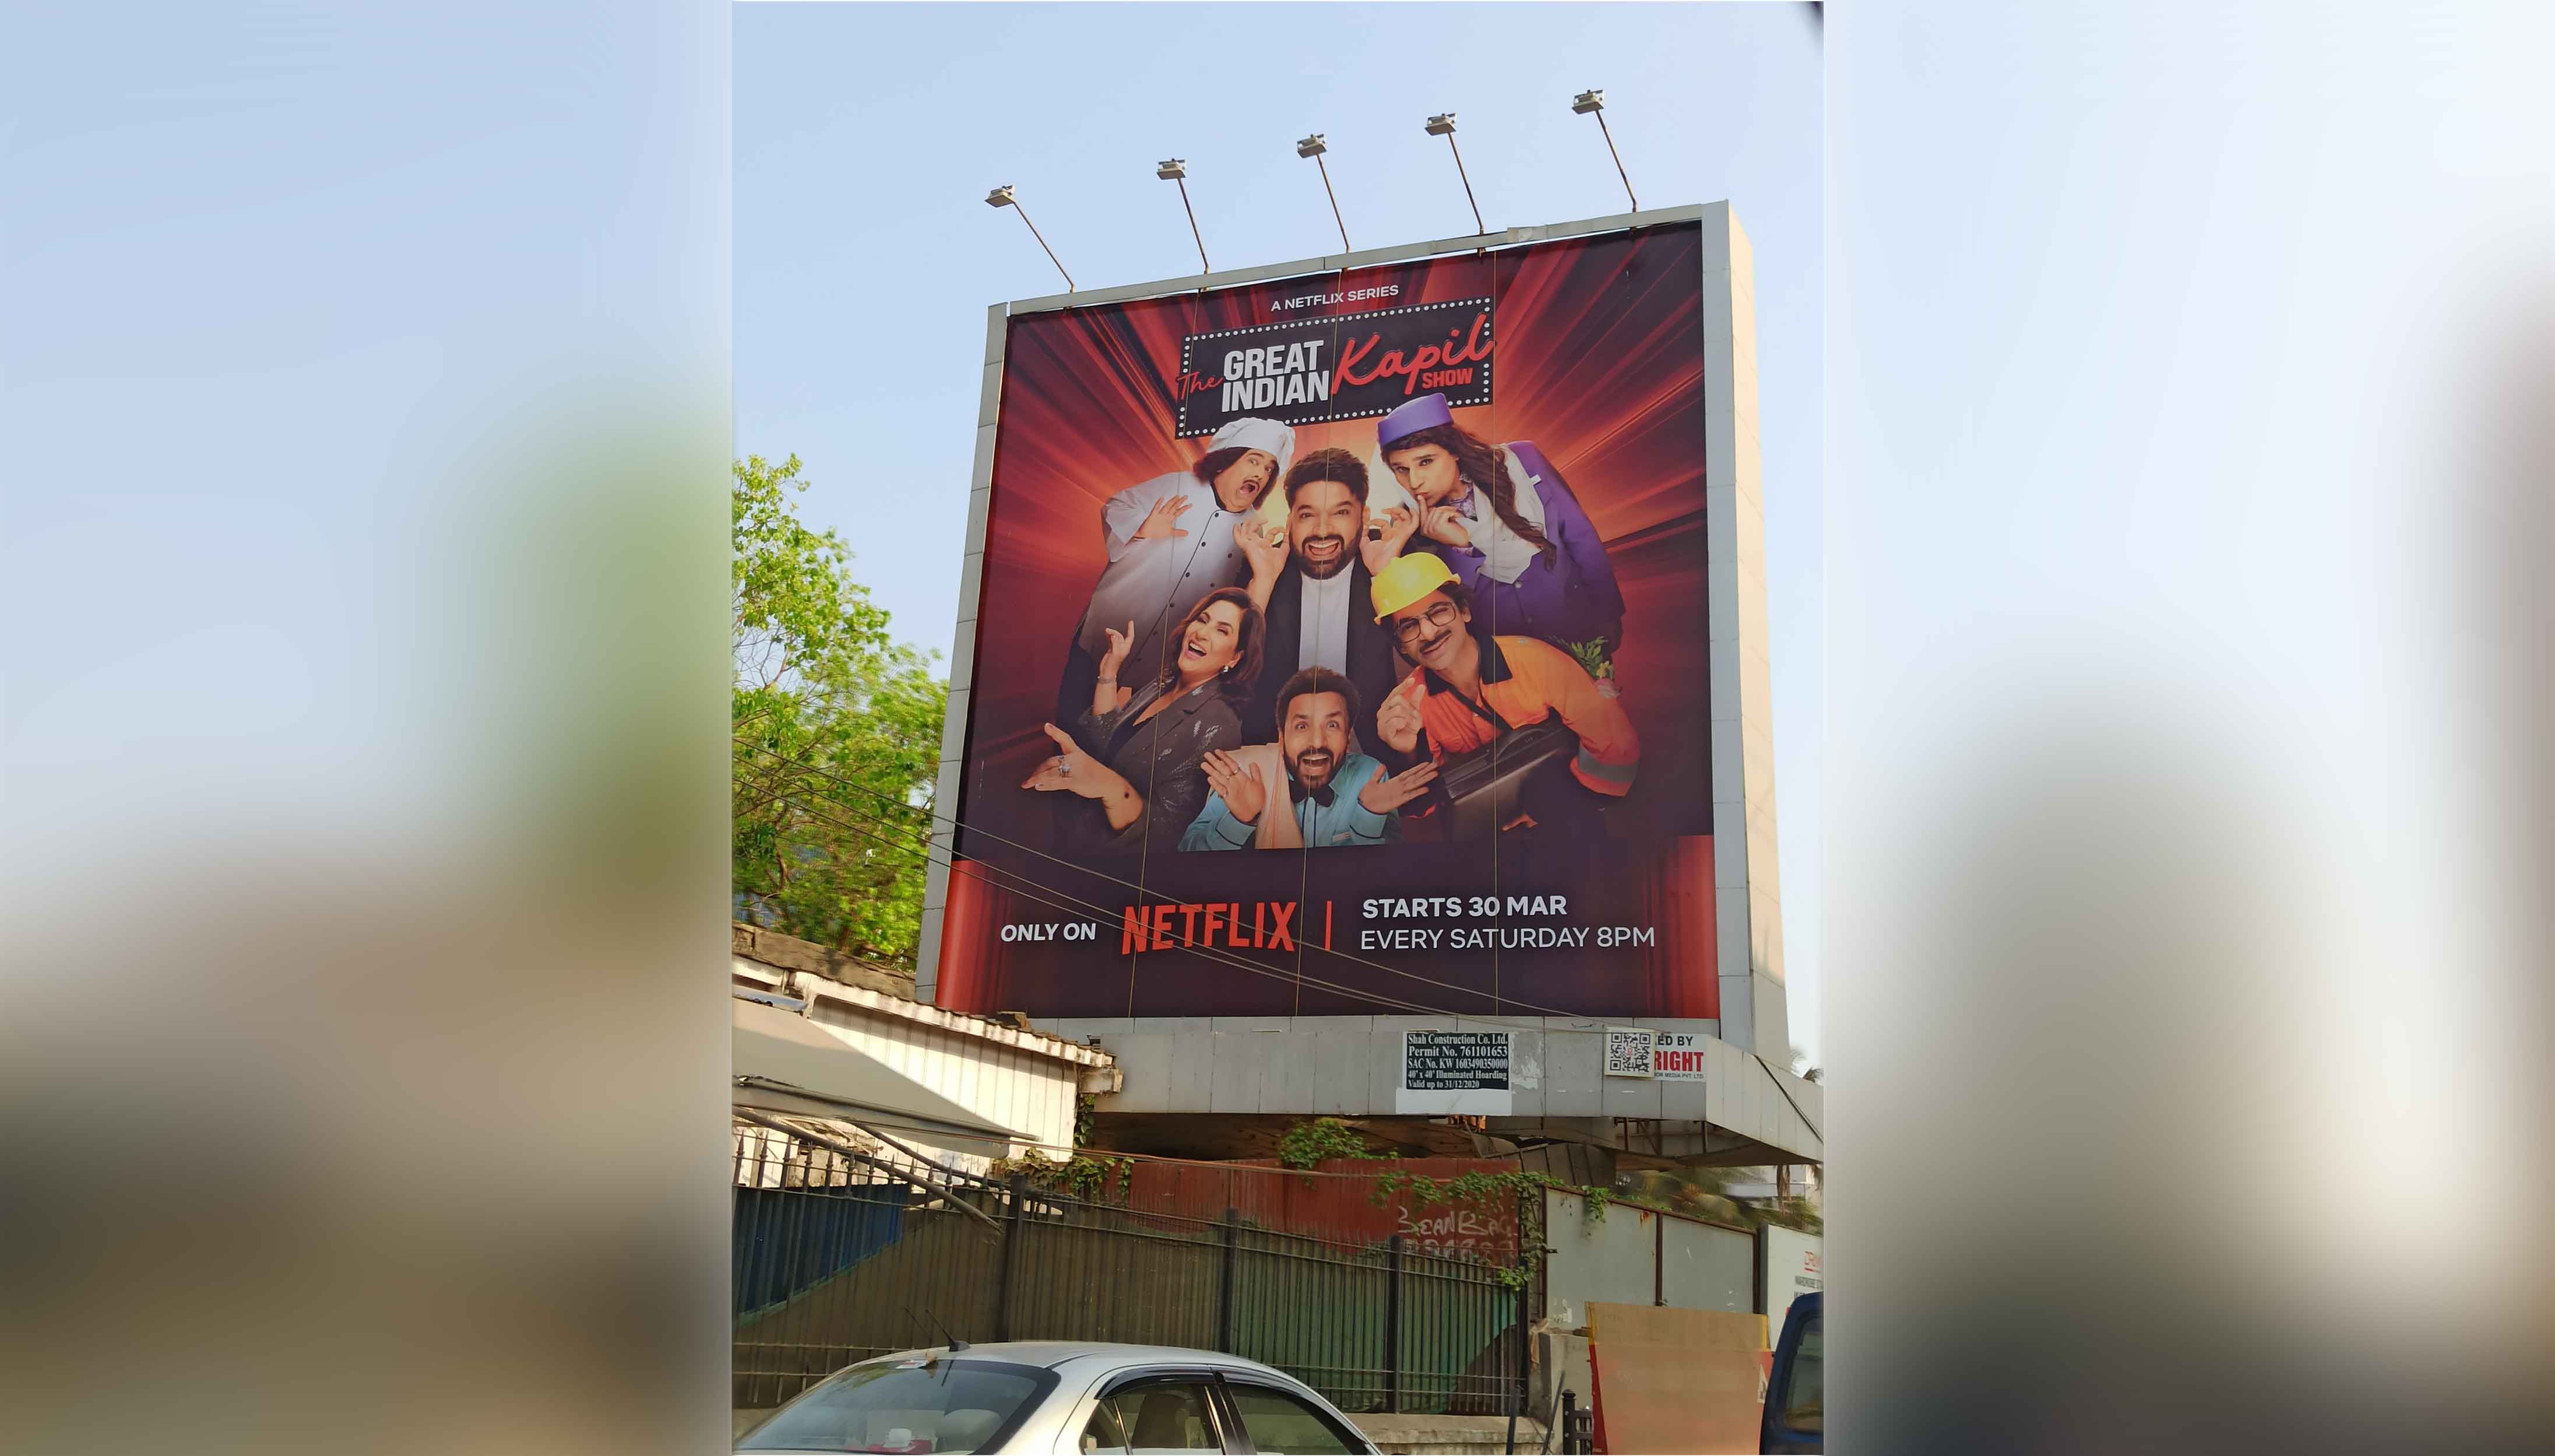 The Great Indian Kapil Show goes big on OOH